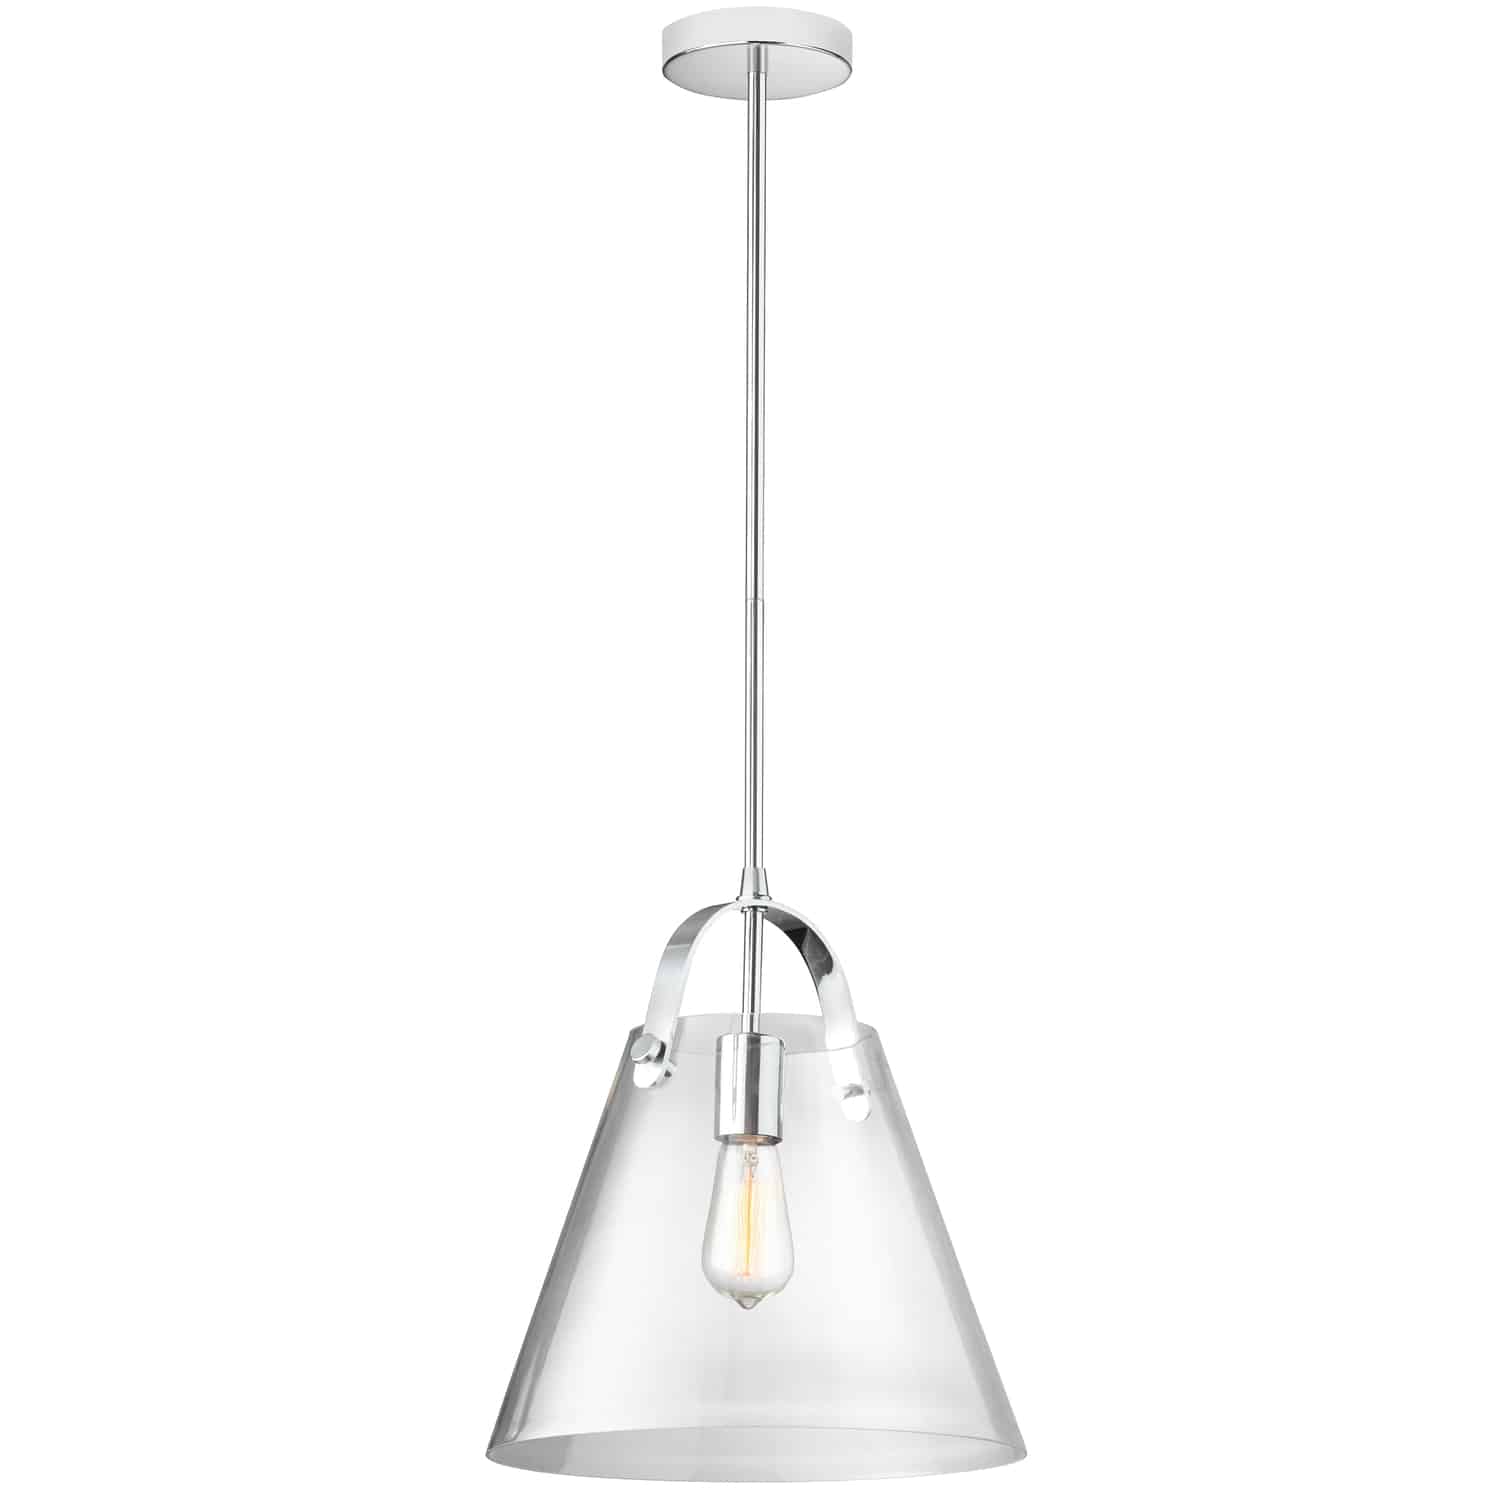 The Polly family of lighting acts like a spotlight that will draw attention to the furnishings in its vicinity. It features an intriguing design with a modern sheen. The metal frame in your choice of finish drops straight into a glass housing with a tapered drum shape. A metal arm curves upwards towards the drop to complete a triangular outline. Along with the metal finish, different bulb shapes create multiple looks. The unusual profile and gleaming surfaces make it a stylish addition to foyers, kitchens and dining rooms.